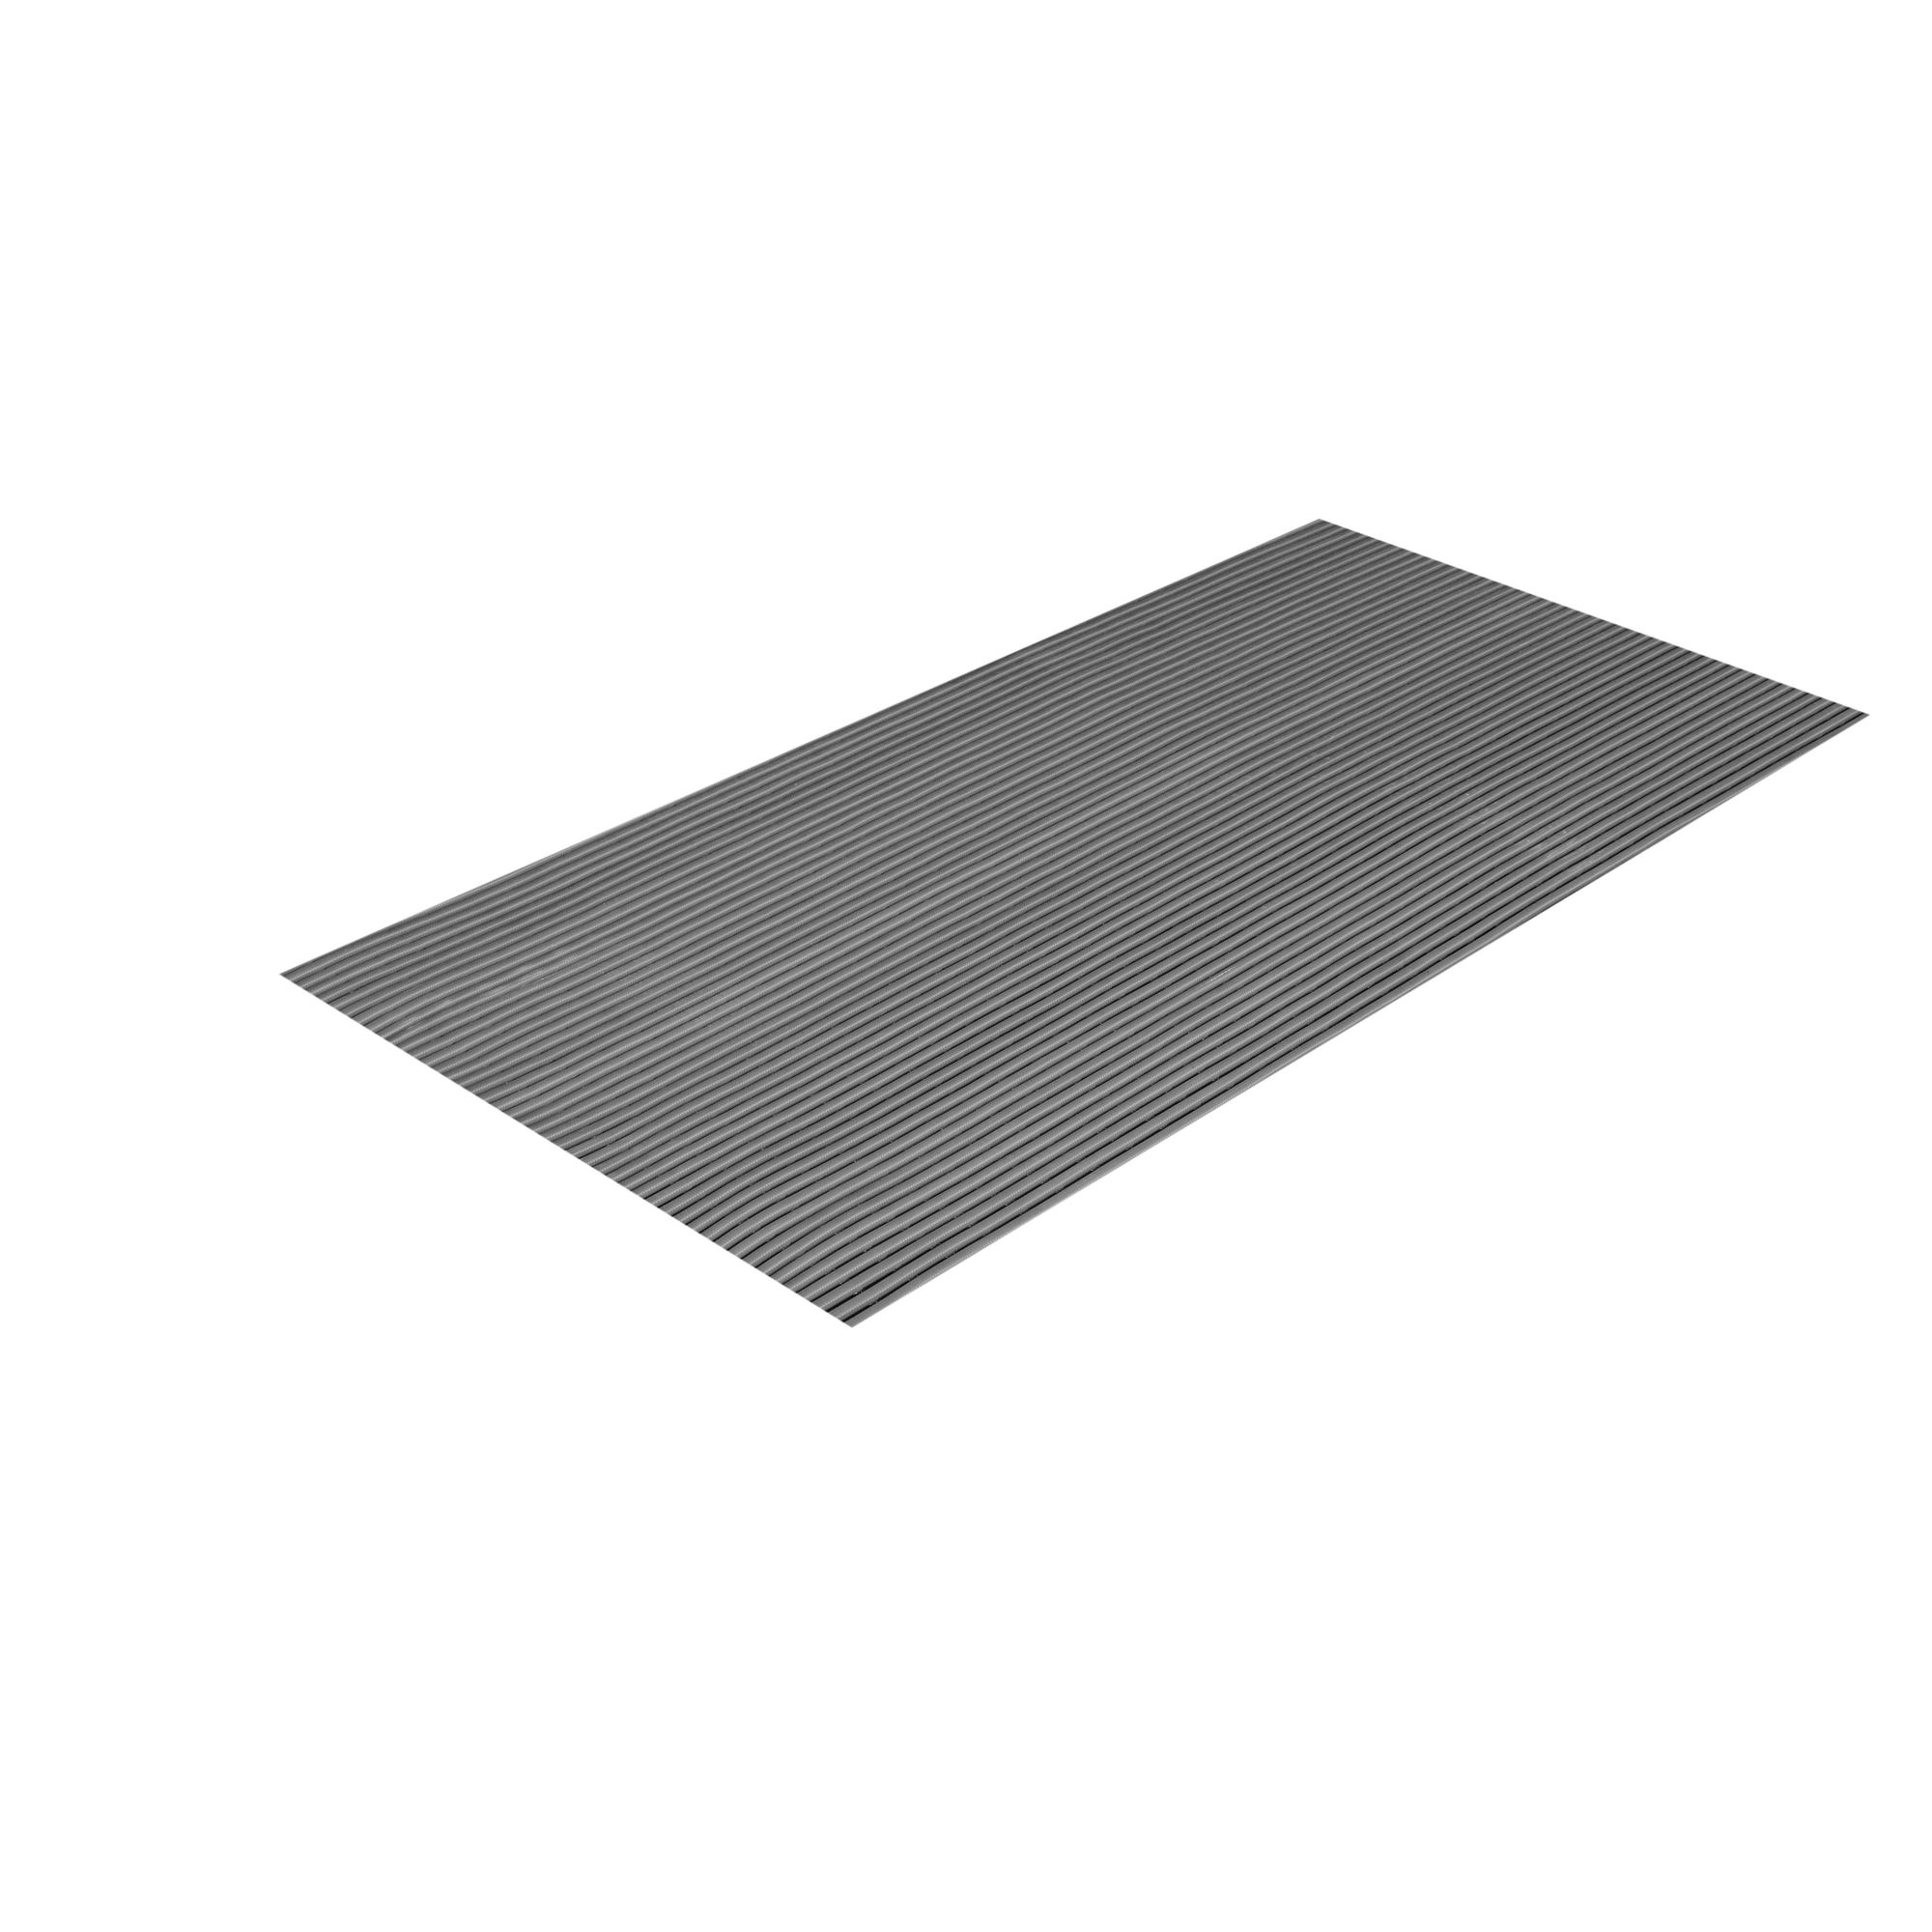 Crown Matting Technologies, Sani-Tred 4ft.x40ft. Charcoal, Width 48 in, Length 480 in, Thickness 15/32 in, Model HVR0048CH